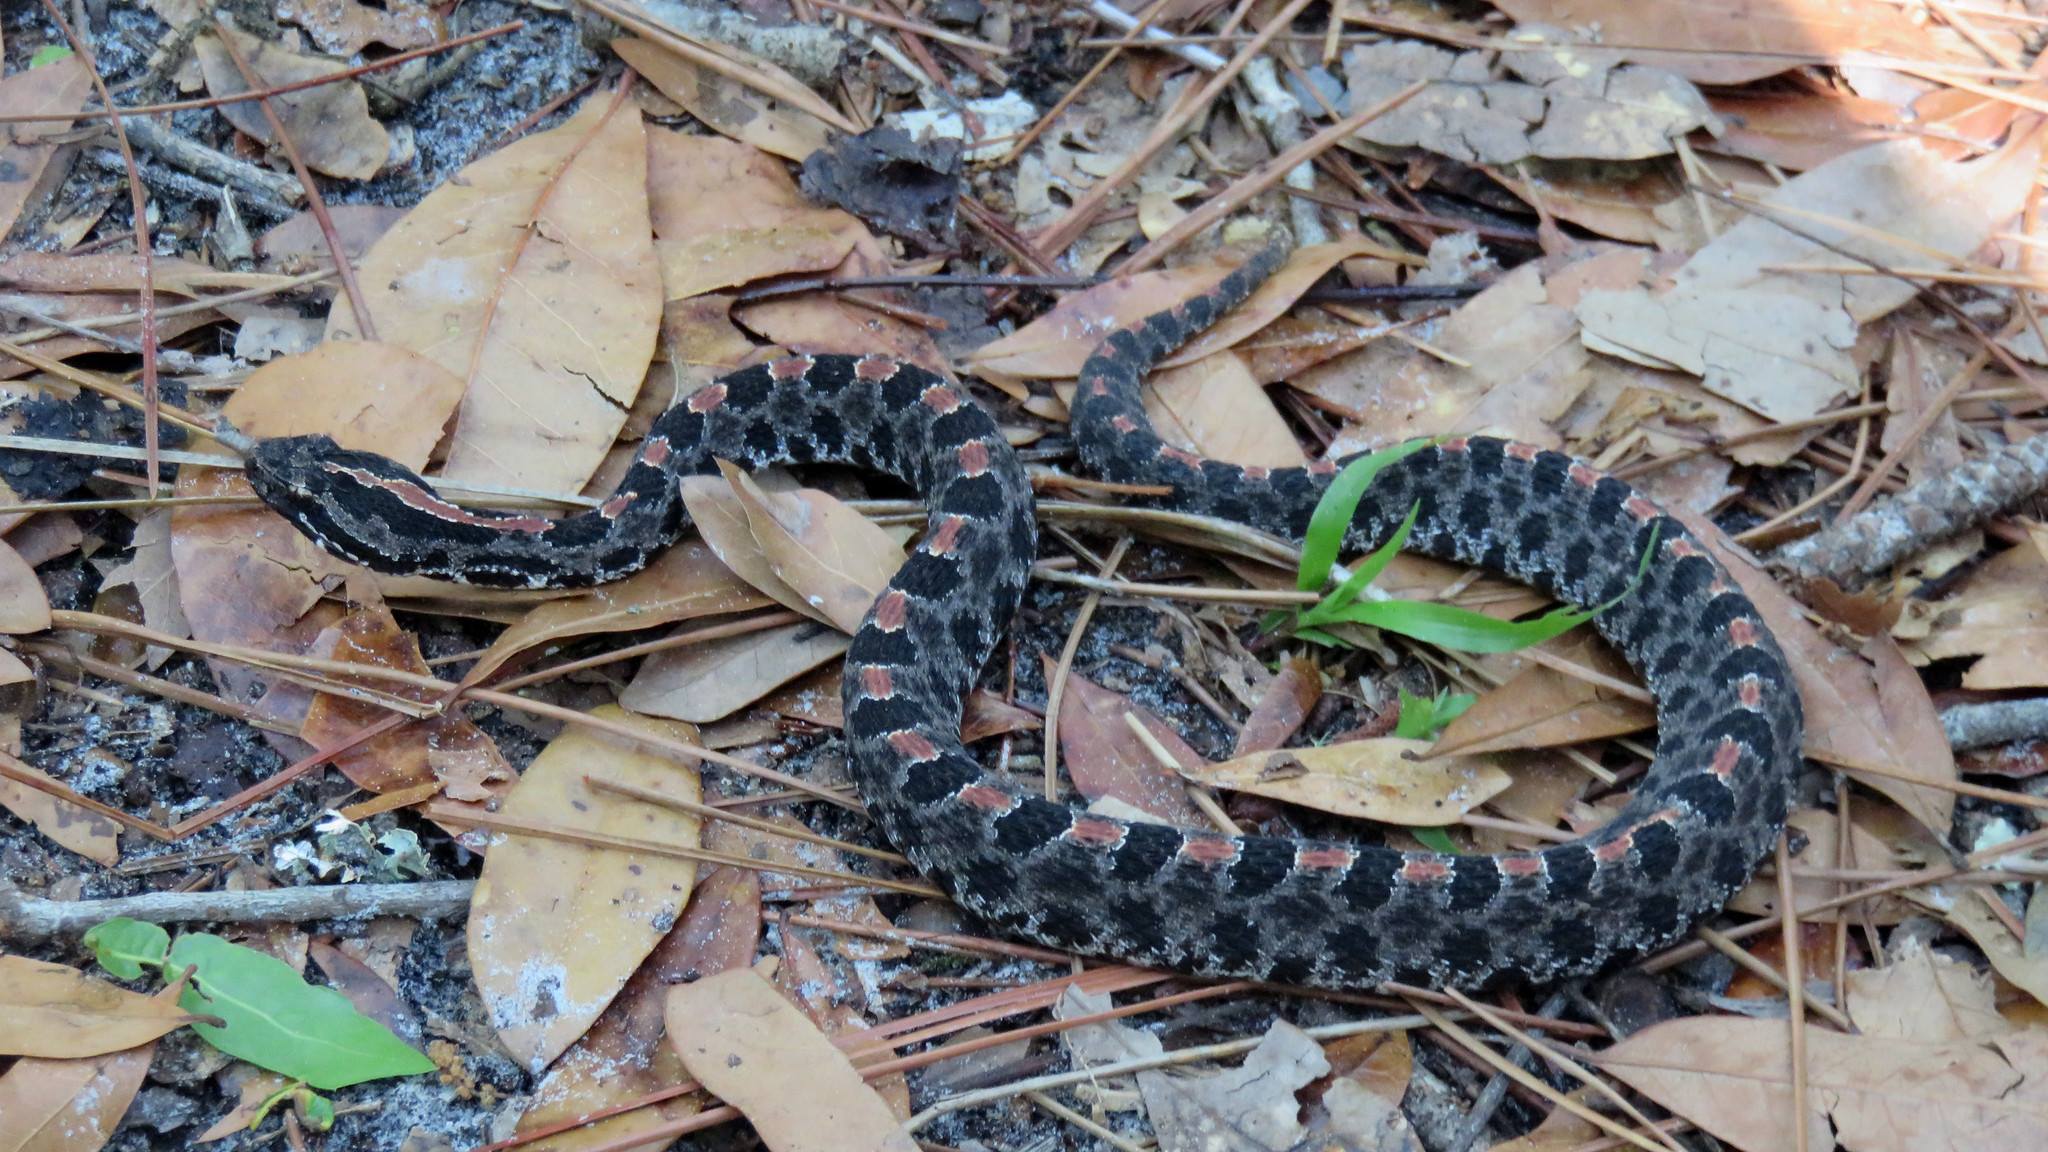 Venomous snakes to watch out for in Florida